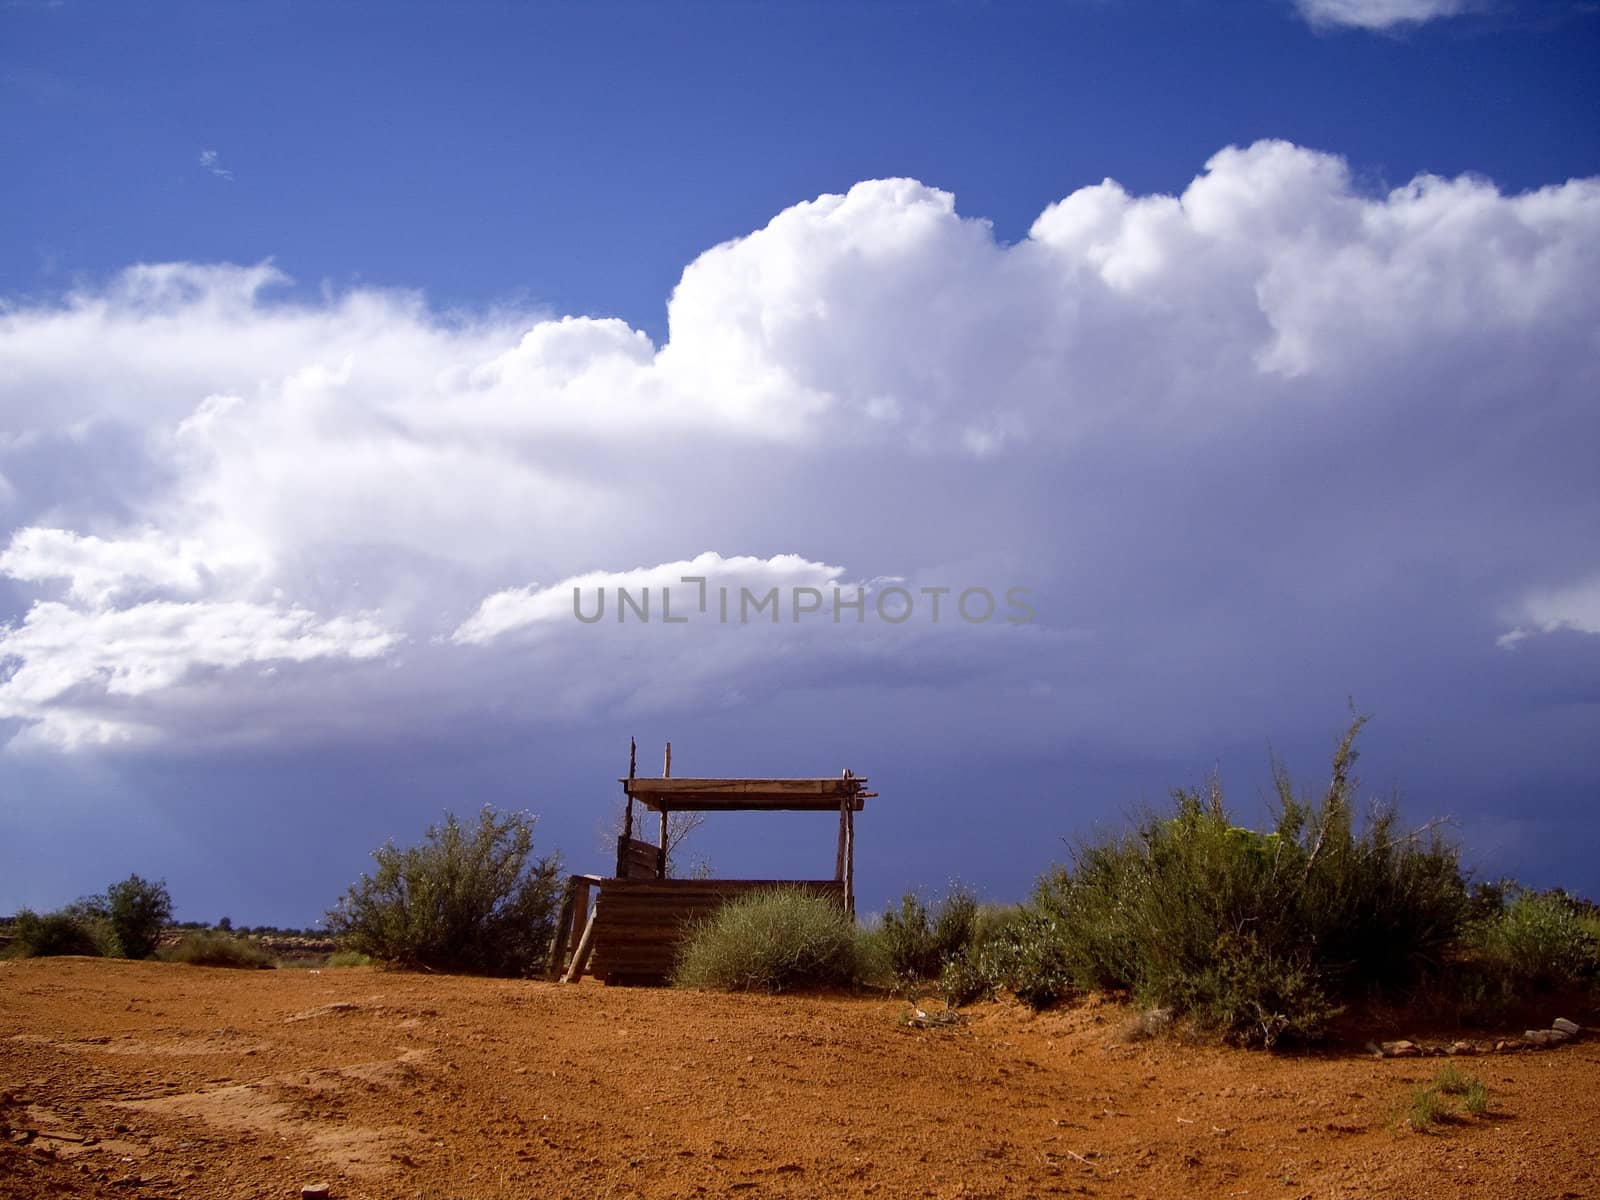 Storm clouds roll in for a rare Summer downpour in desert